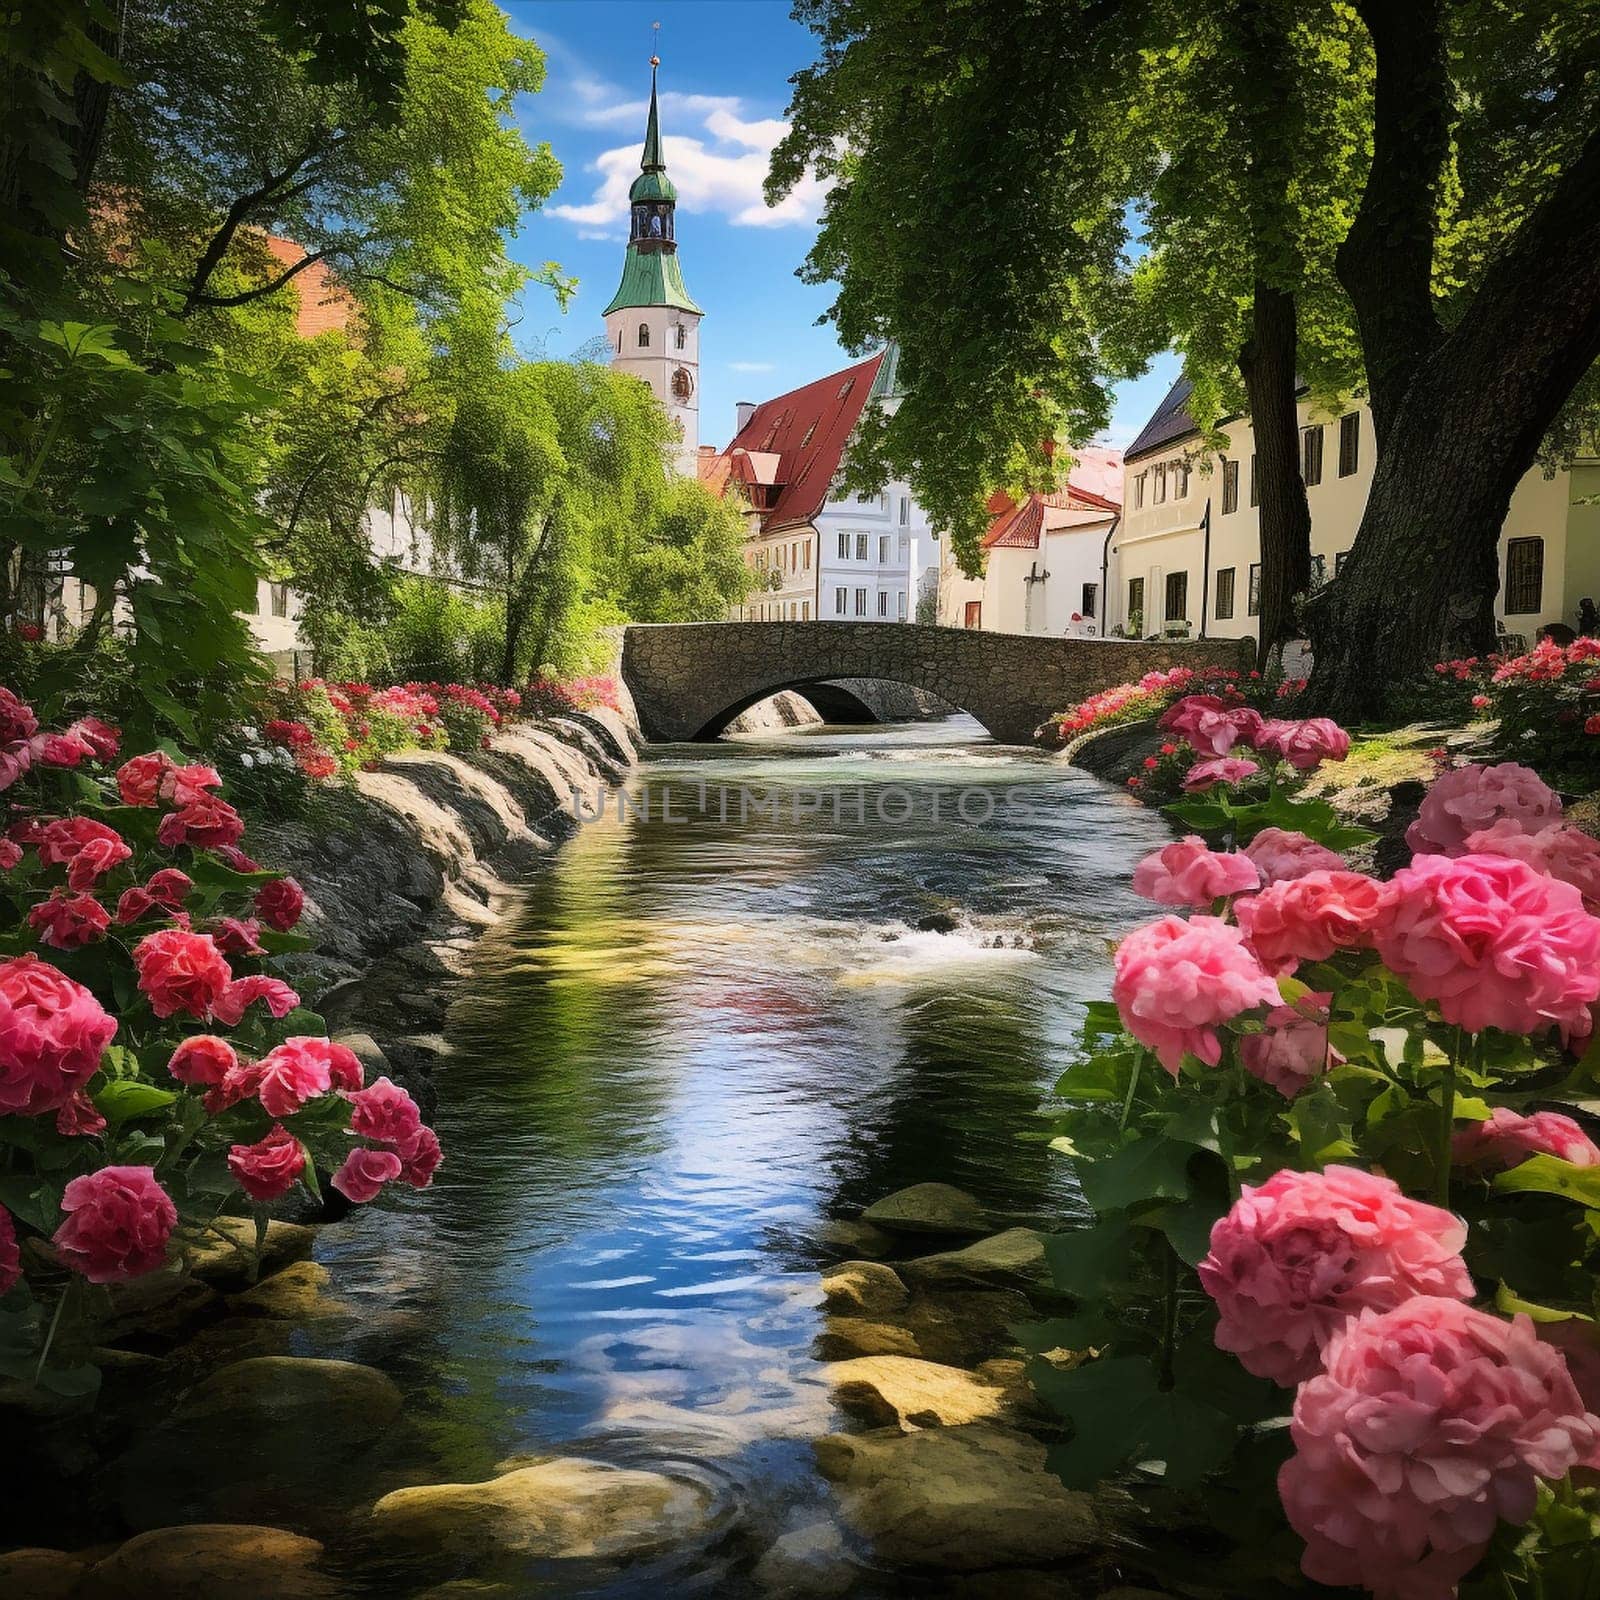 Experience the serene beauty of Tallinn's nature havens with this picturesque image. Explore a hidden getaway or a picturesque park adorned with vibrant flora and surrounded by towering trees. Let the tranquility and sense of escape wash over you as you gaze upon this breathtaking scene. The image evokes a sense of wonder, inspiring viewers to dream of exploring Tallinn's natural wonders.